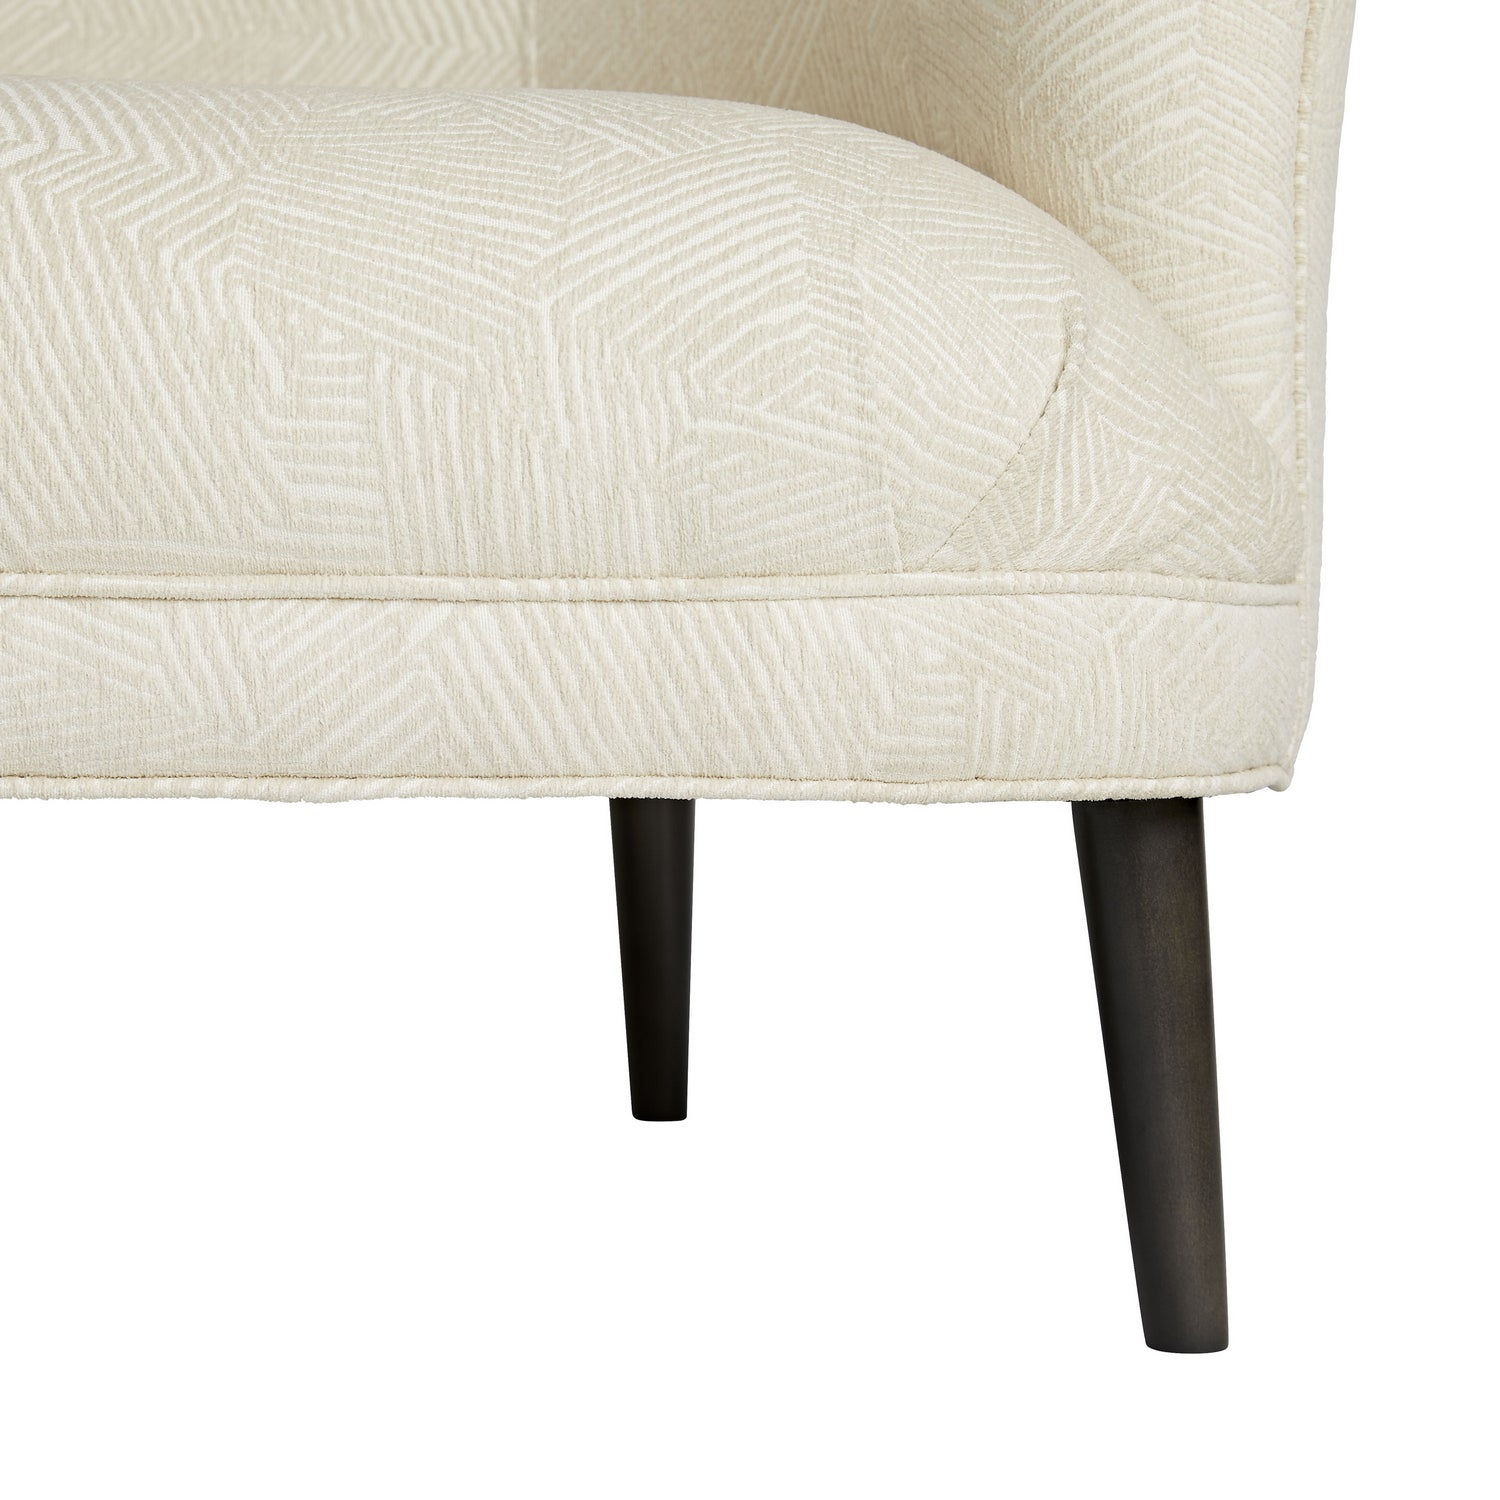 Settee from the Duprey collection in Textured Ivory finish